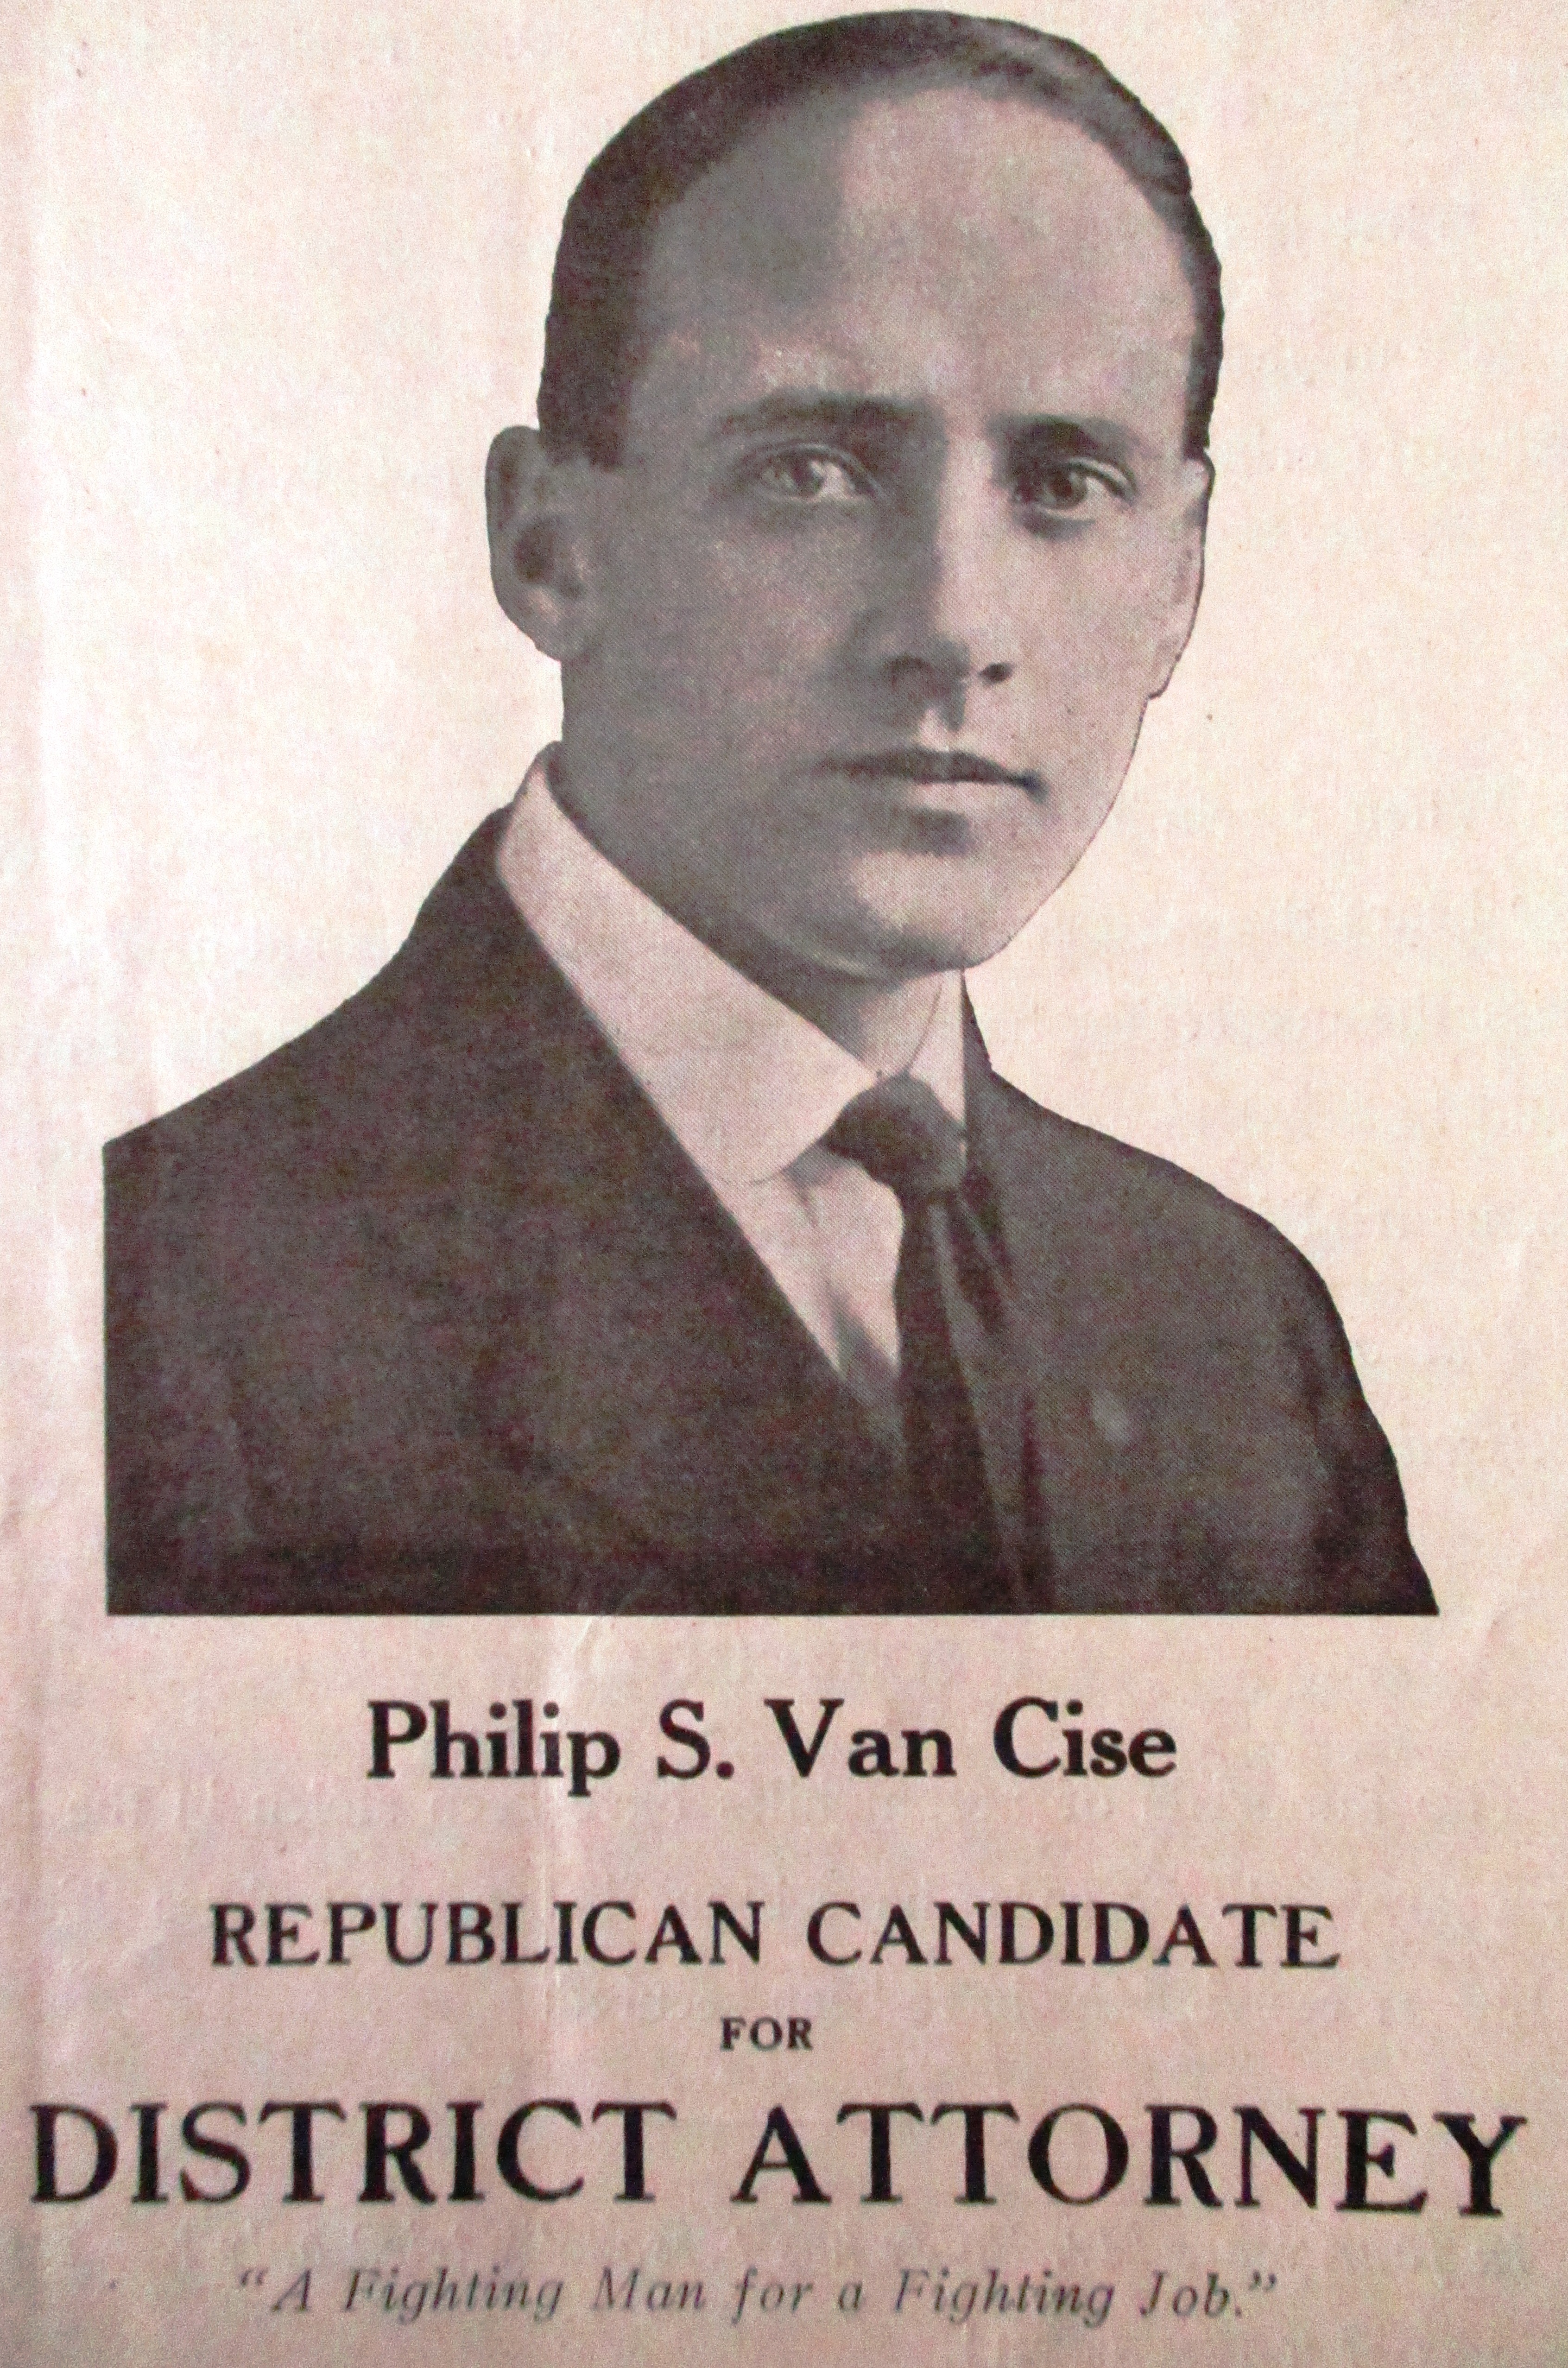 Phillip S. Van Cise Republican Candidate for District Attorney. "A Fighting Man for a Fighting Job."